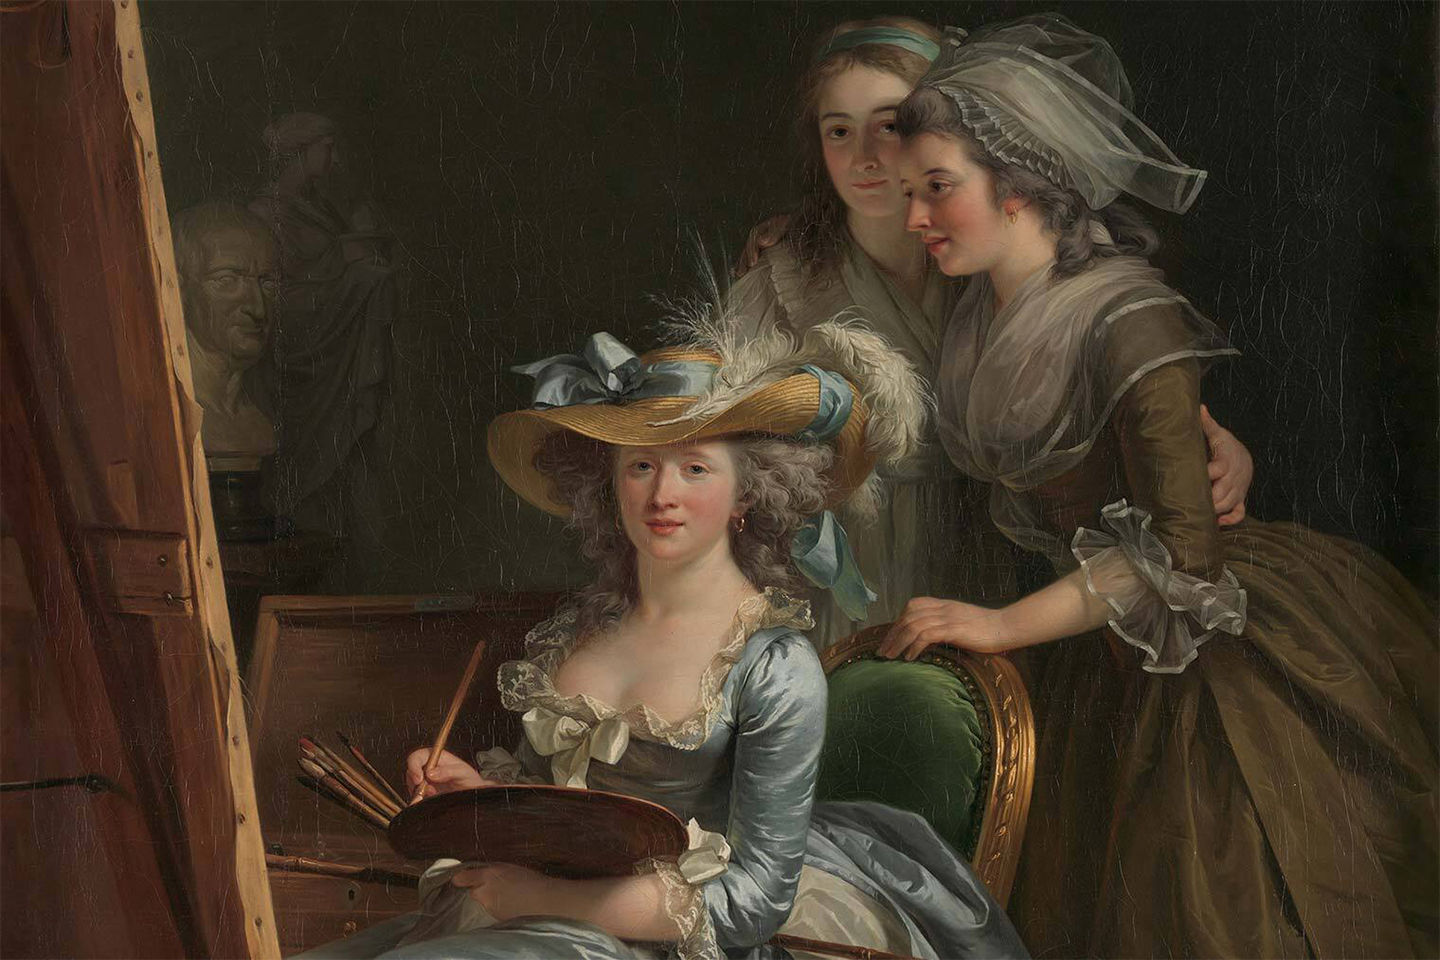 A painting of three women in an 18th-century painting studio